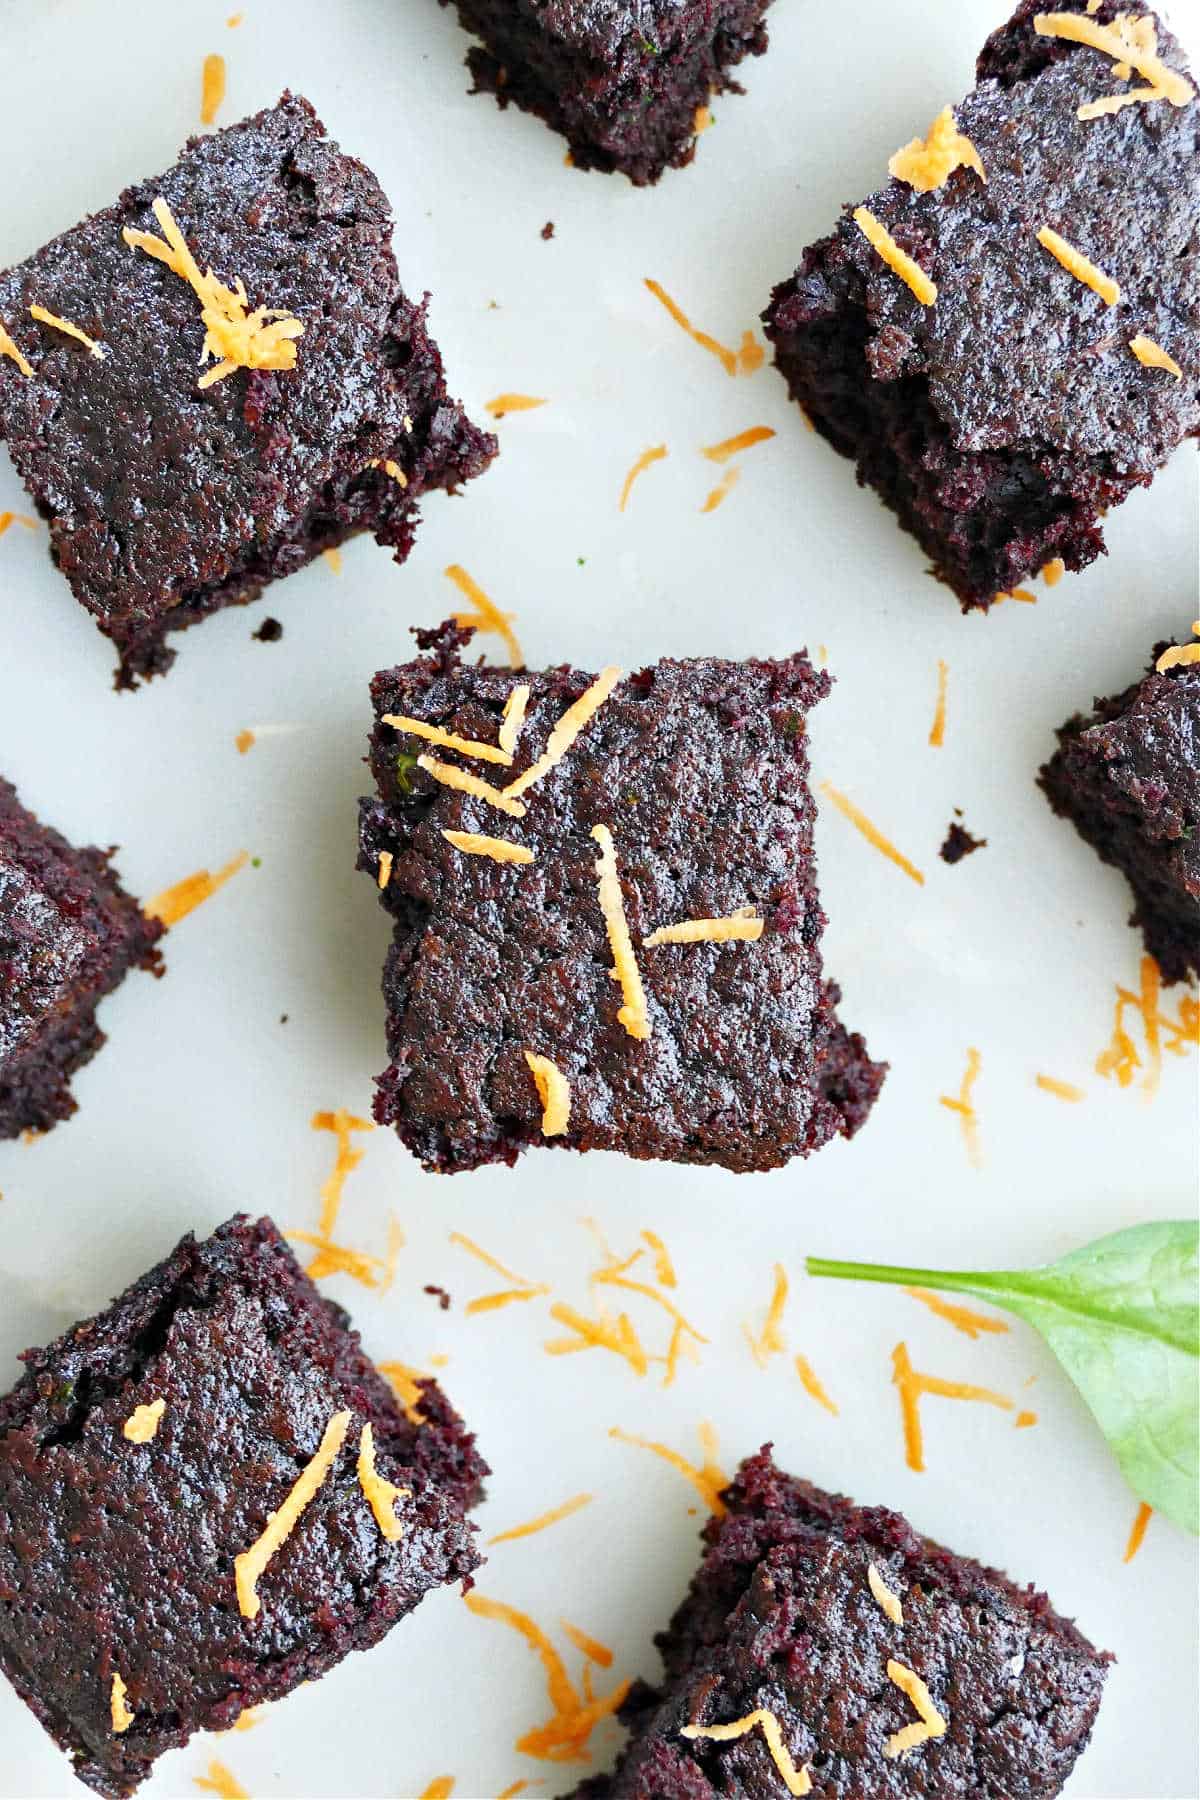 veggie brownies on a counter sprinkled with shredded carrots